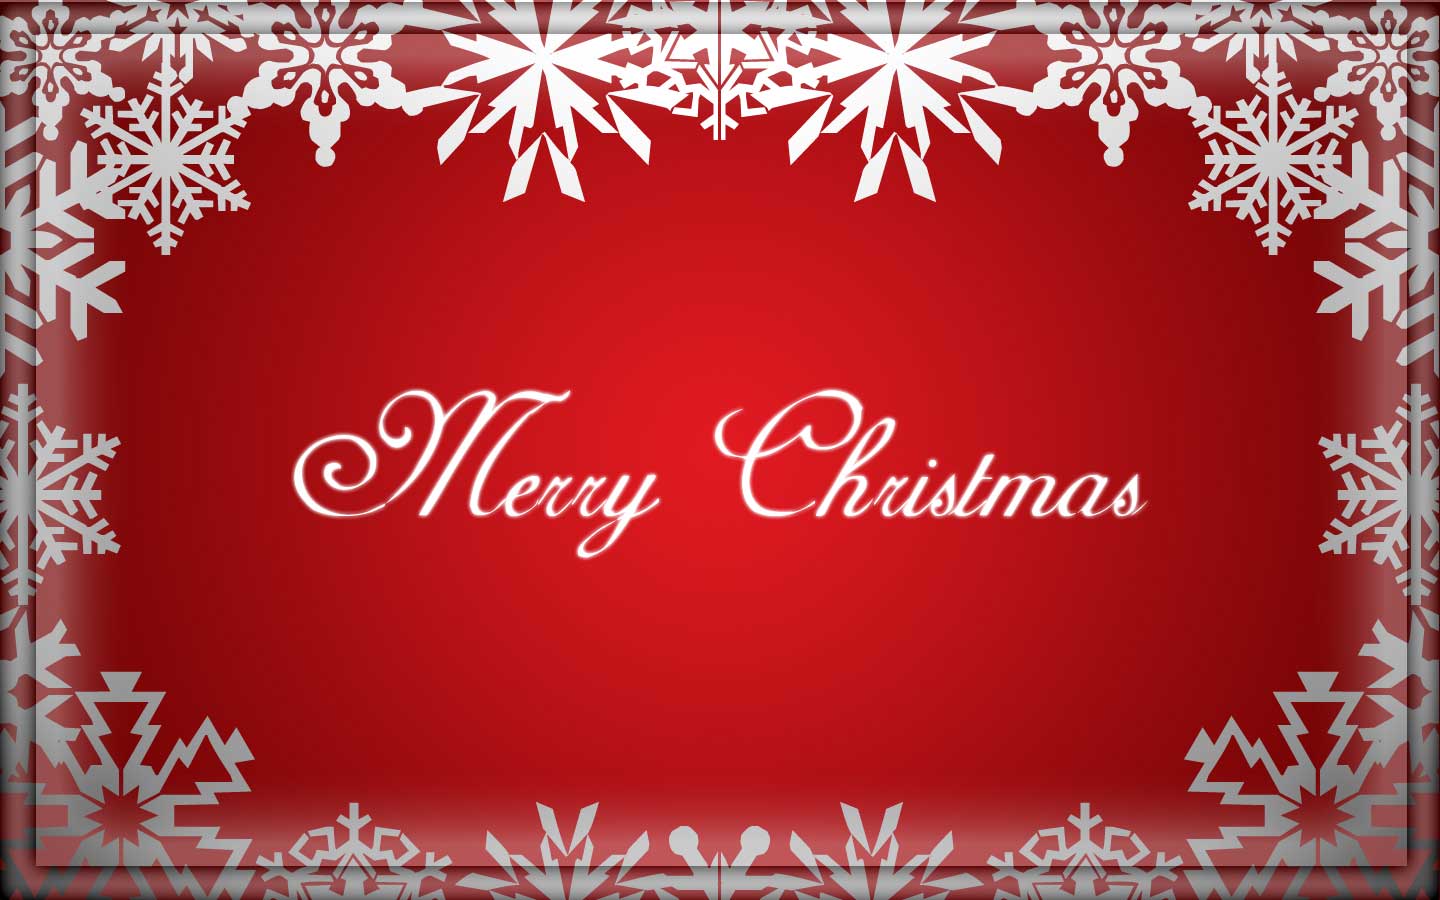 Merry Christmas Wallpapers Wallpapers9 1440x900